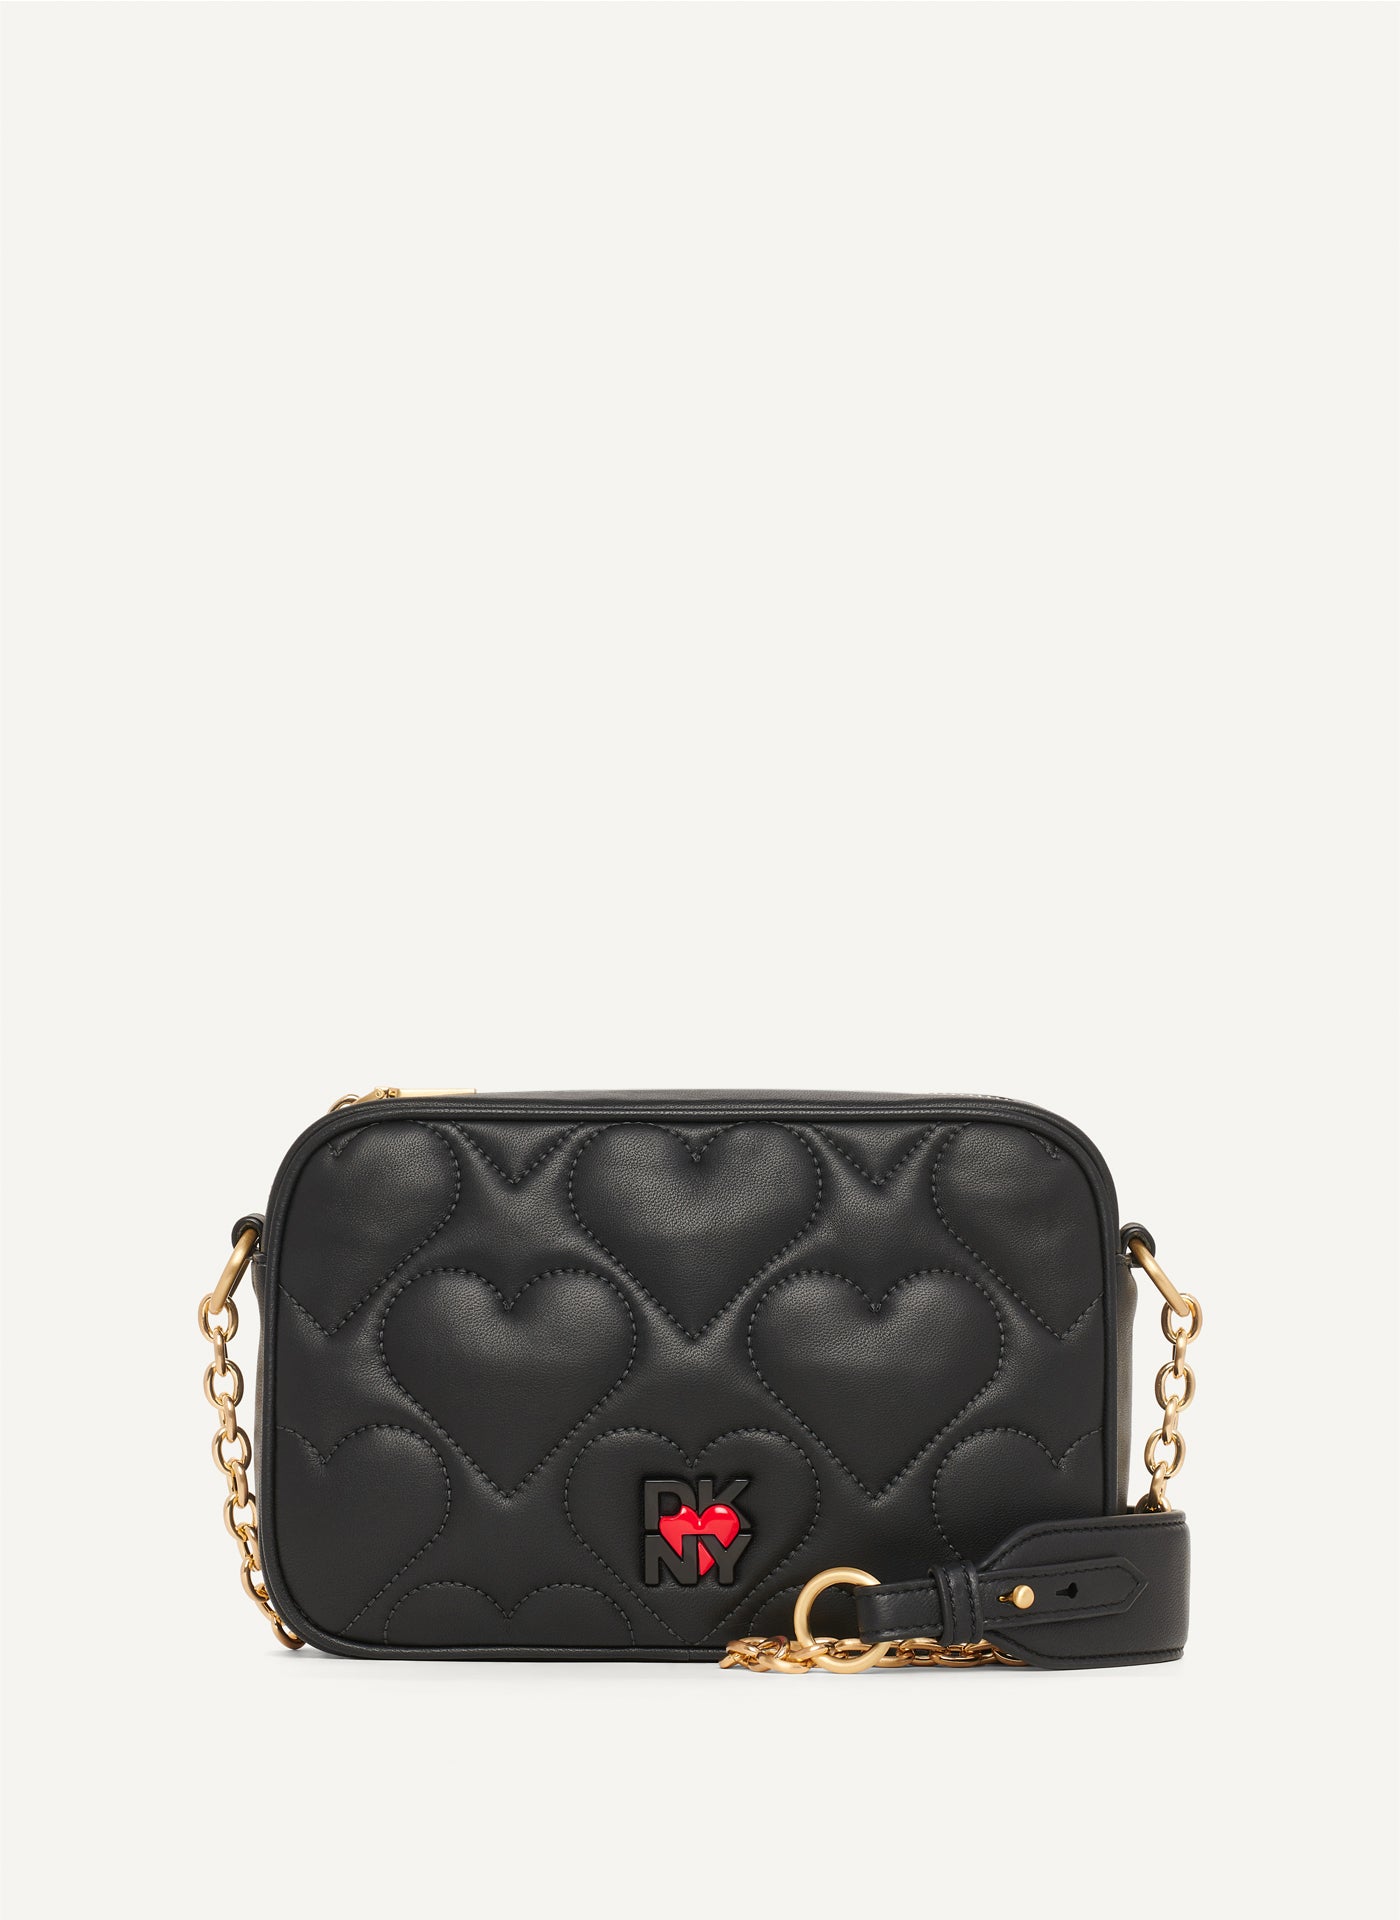 DKNY HEART OF NY QUILTED CAMERA BAG WITH CHAIN,Black